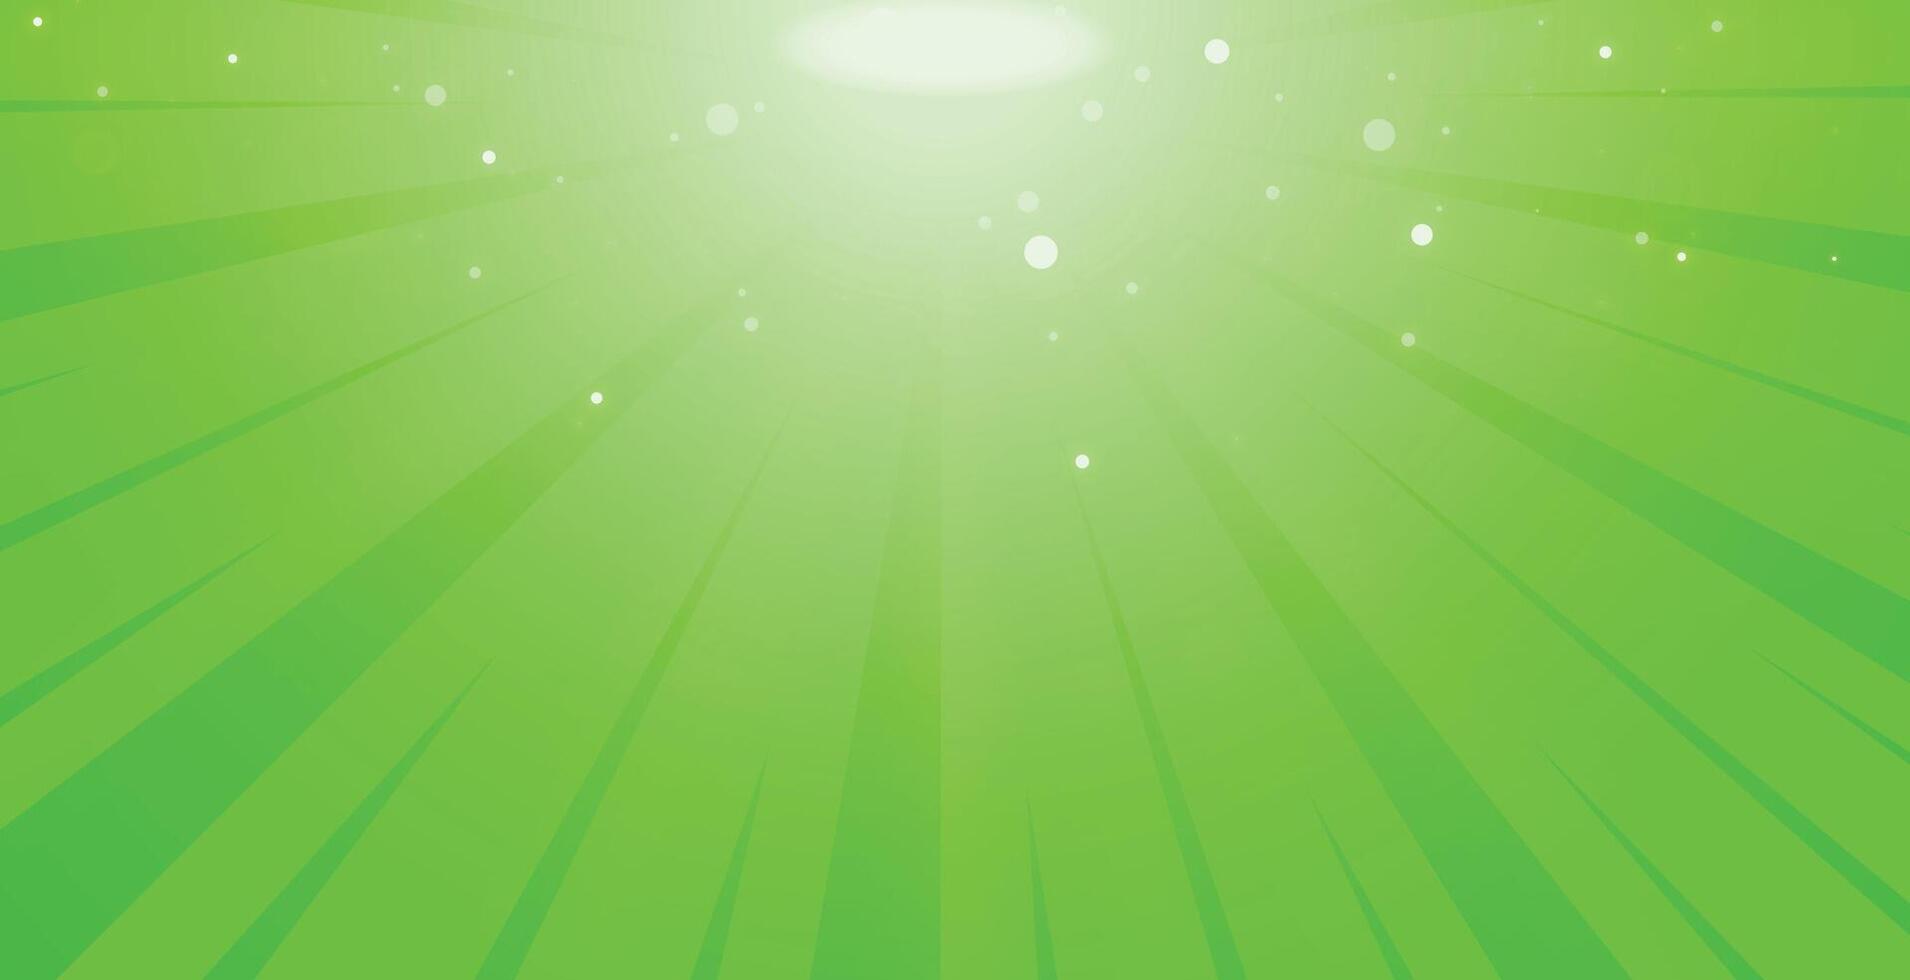 glowing and shiny sunbeam flare background with light effect vector